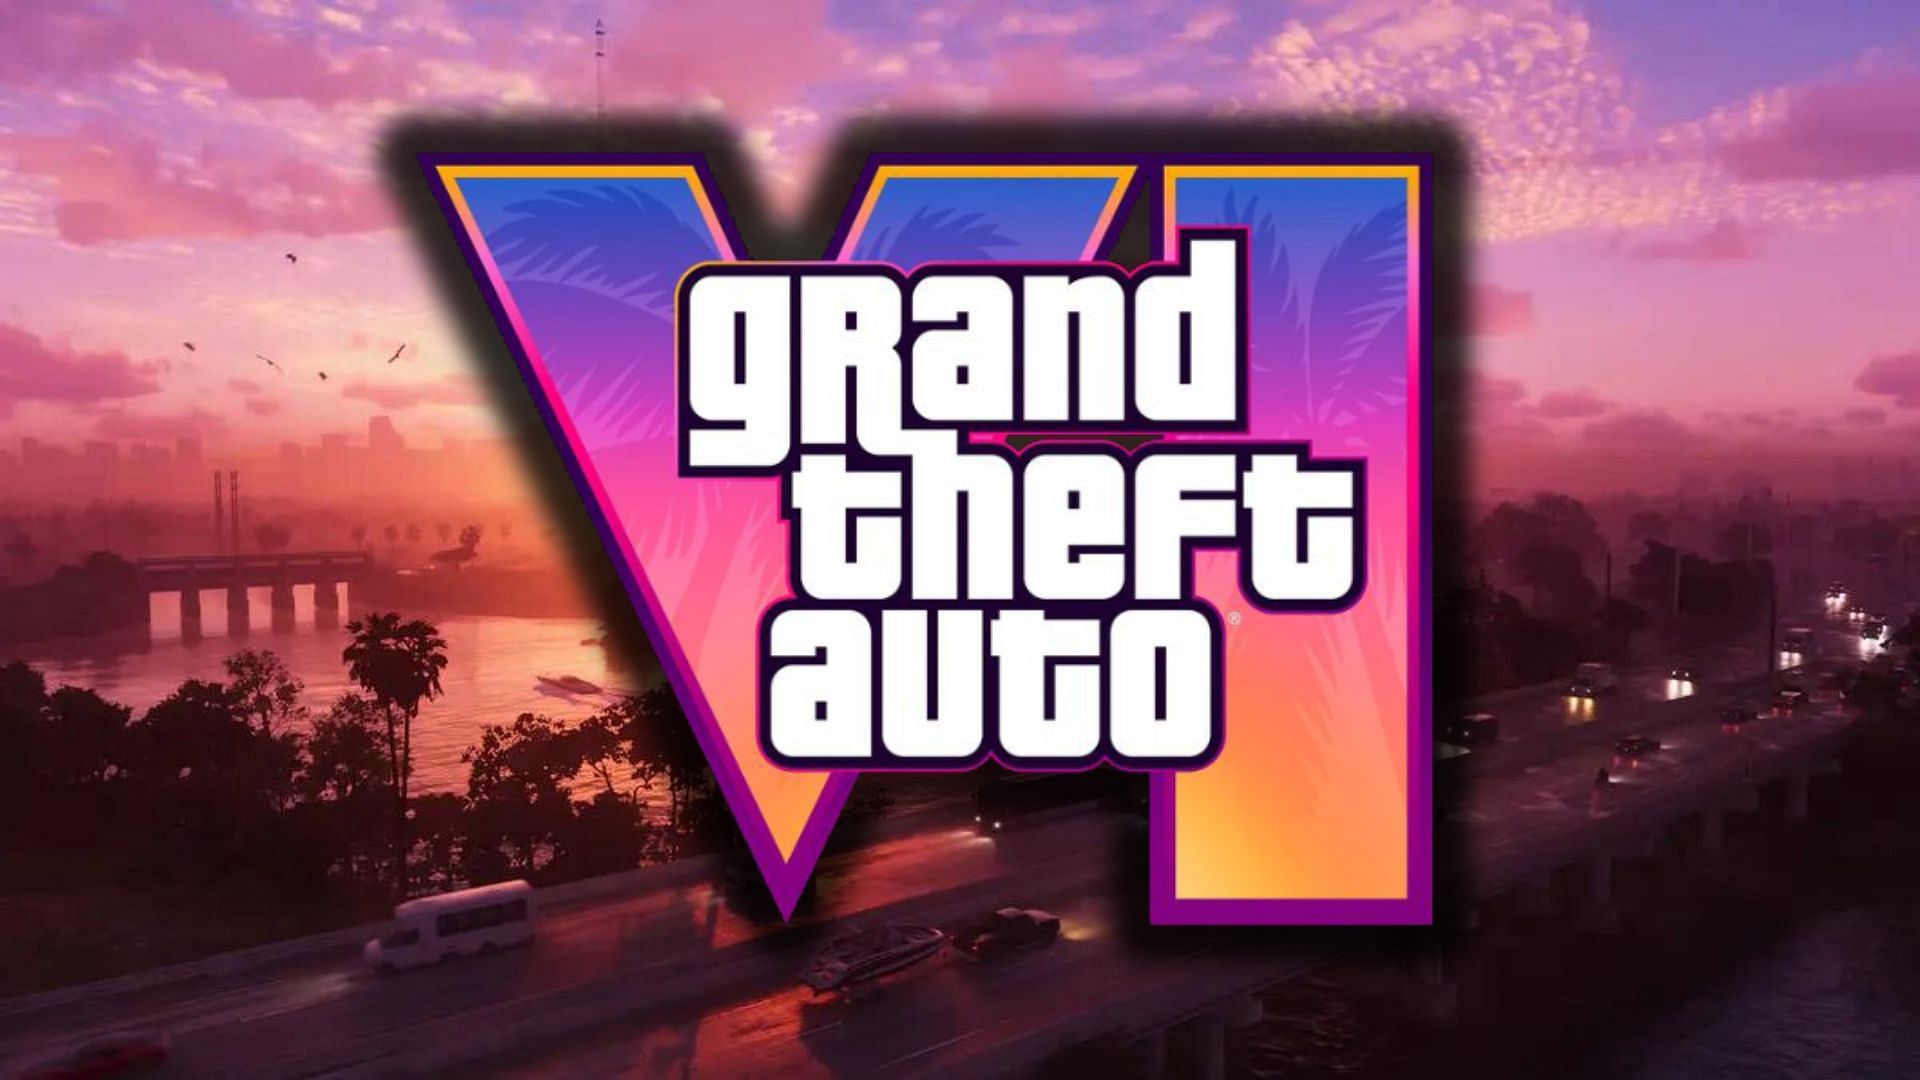 GTA 6 release date is still set for 2025, a 2026 delay unlikely